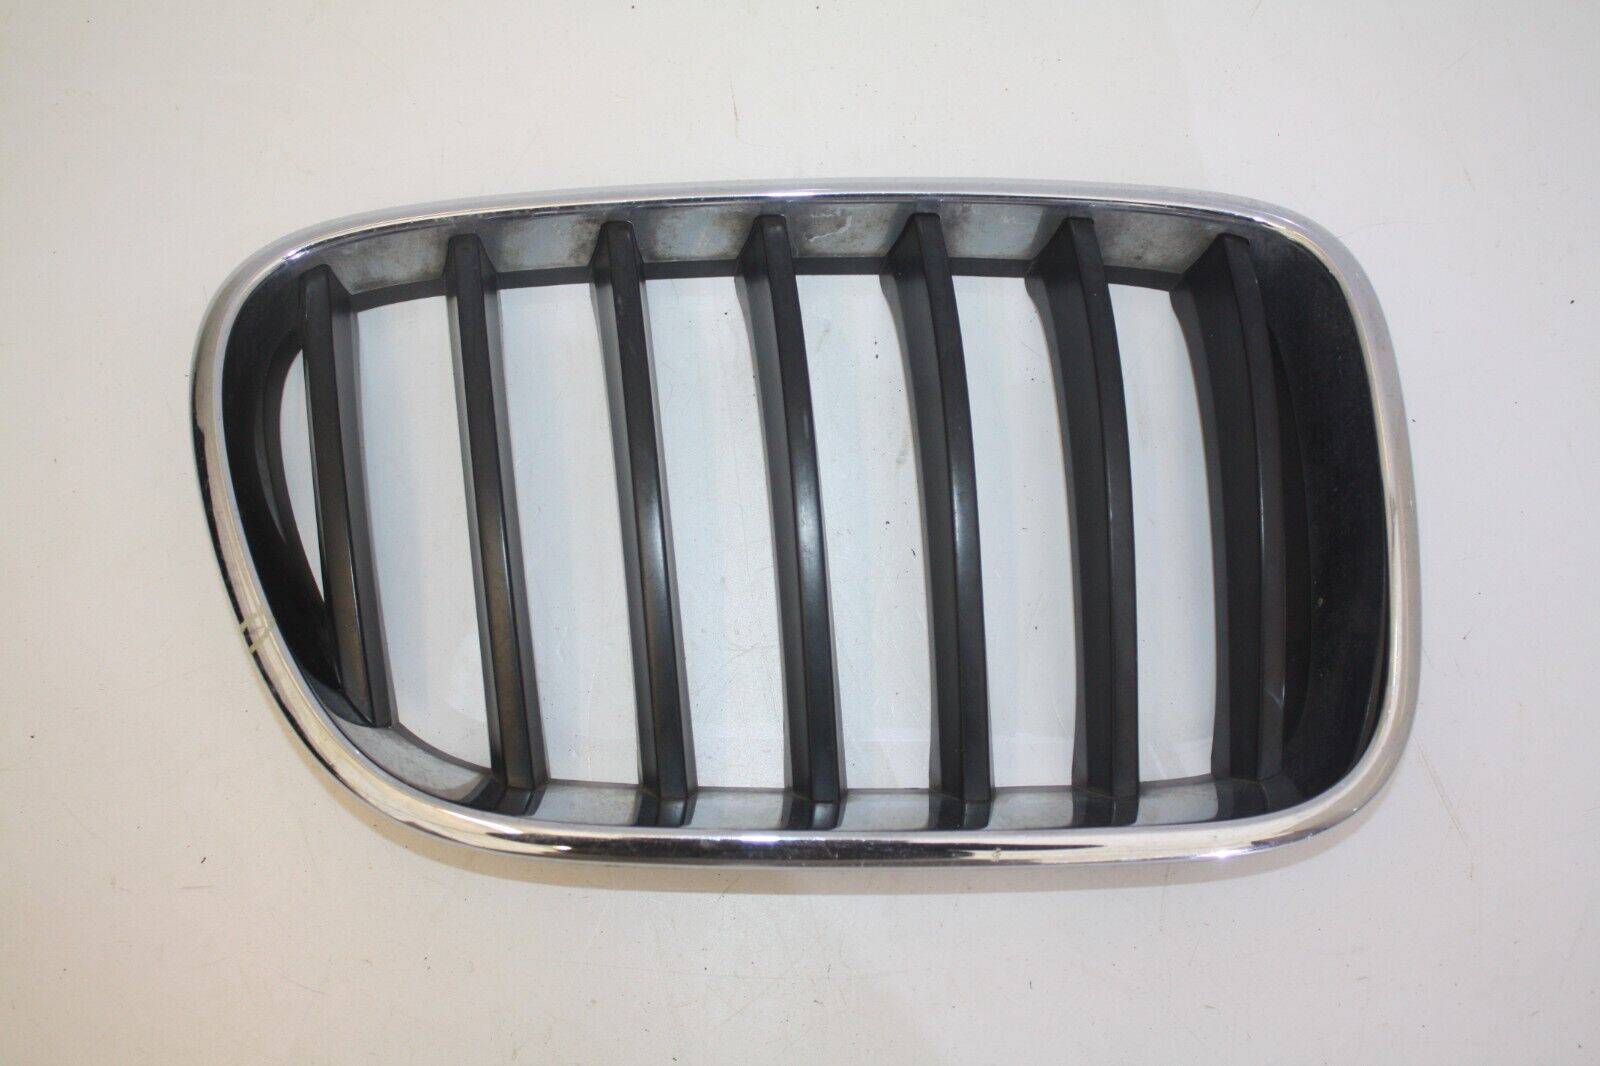 BMW X3 F25 Front Bumper Right Kidney Grill 2010 TO 2014 51117210726 Genuine 176234455095